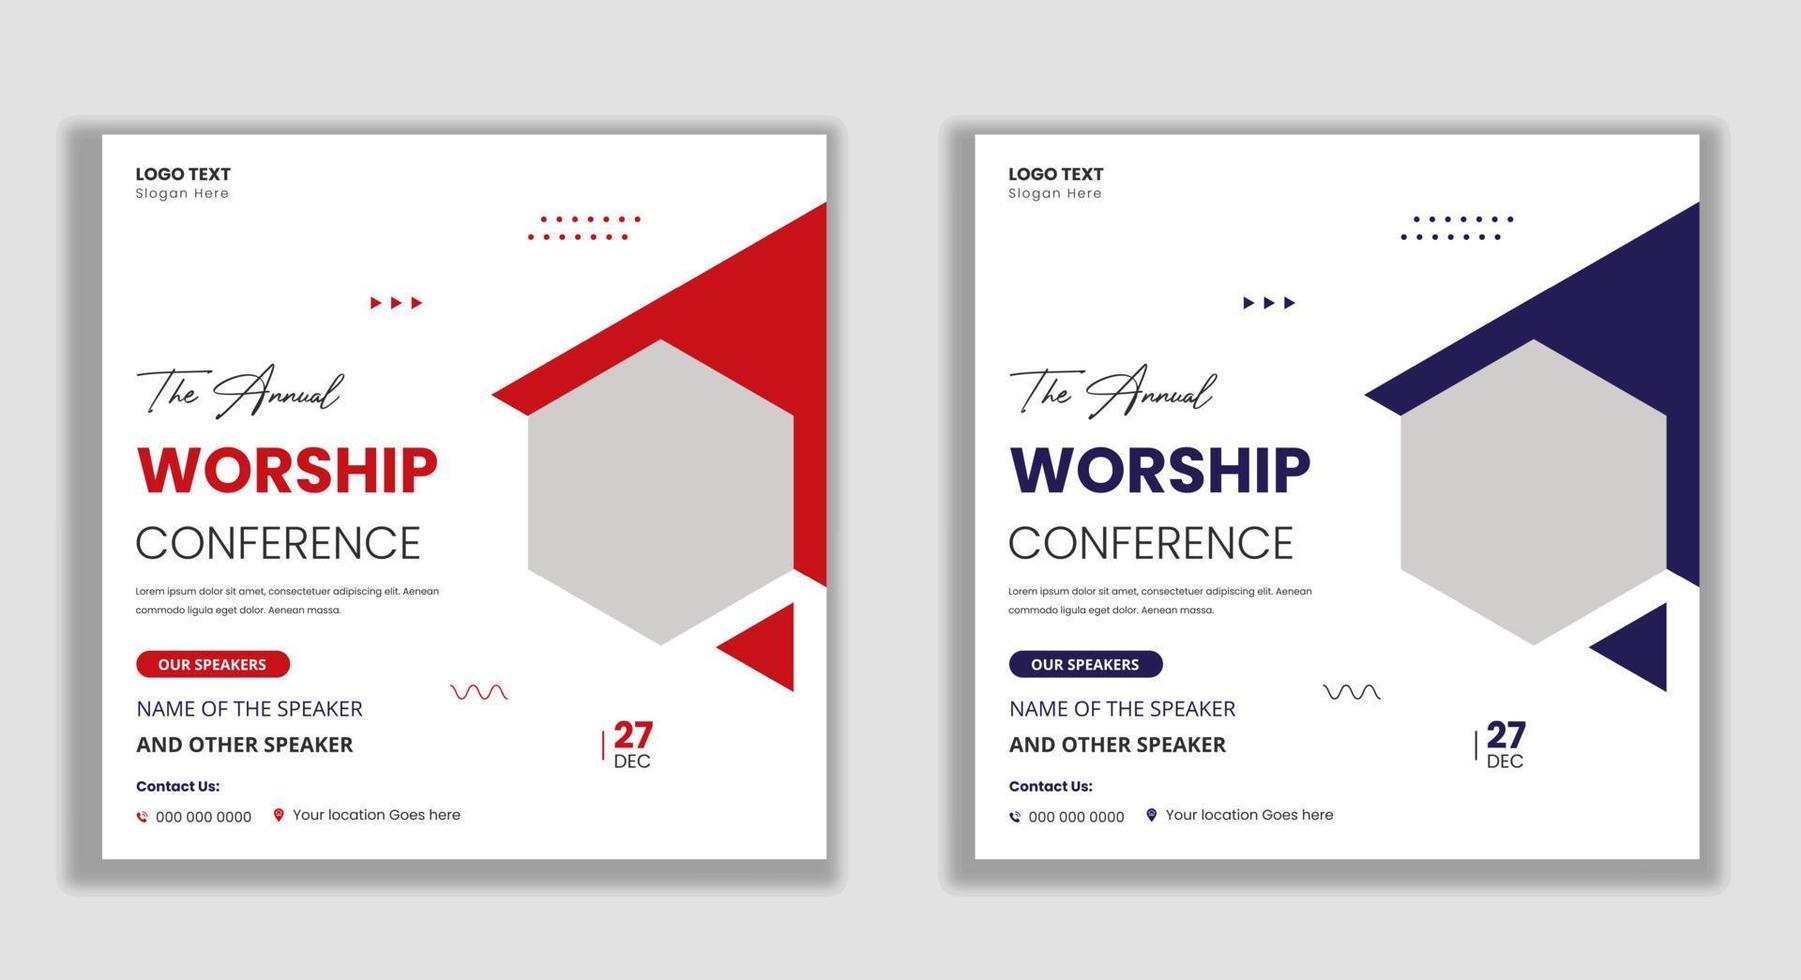 Annual worship conference flyer social media and web banner vector